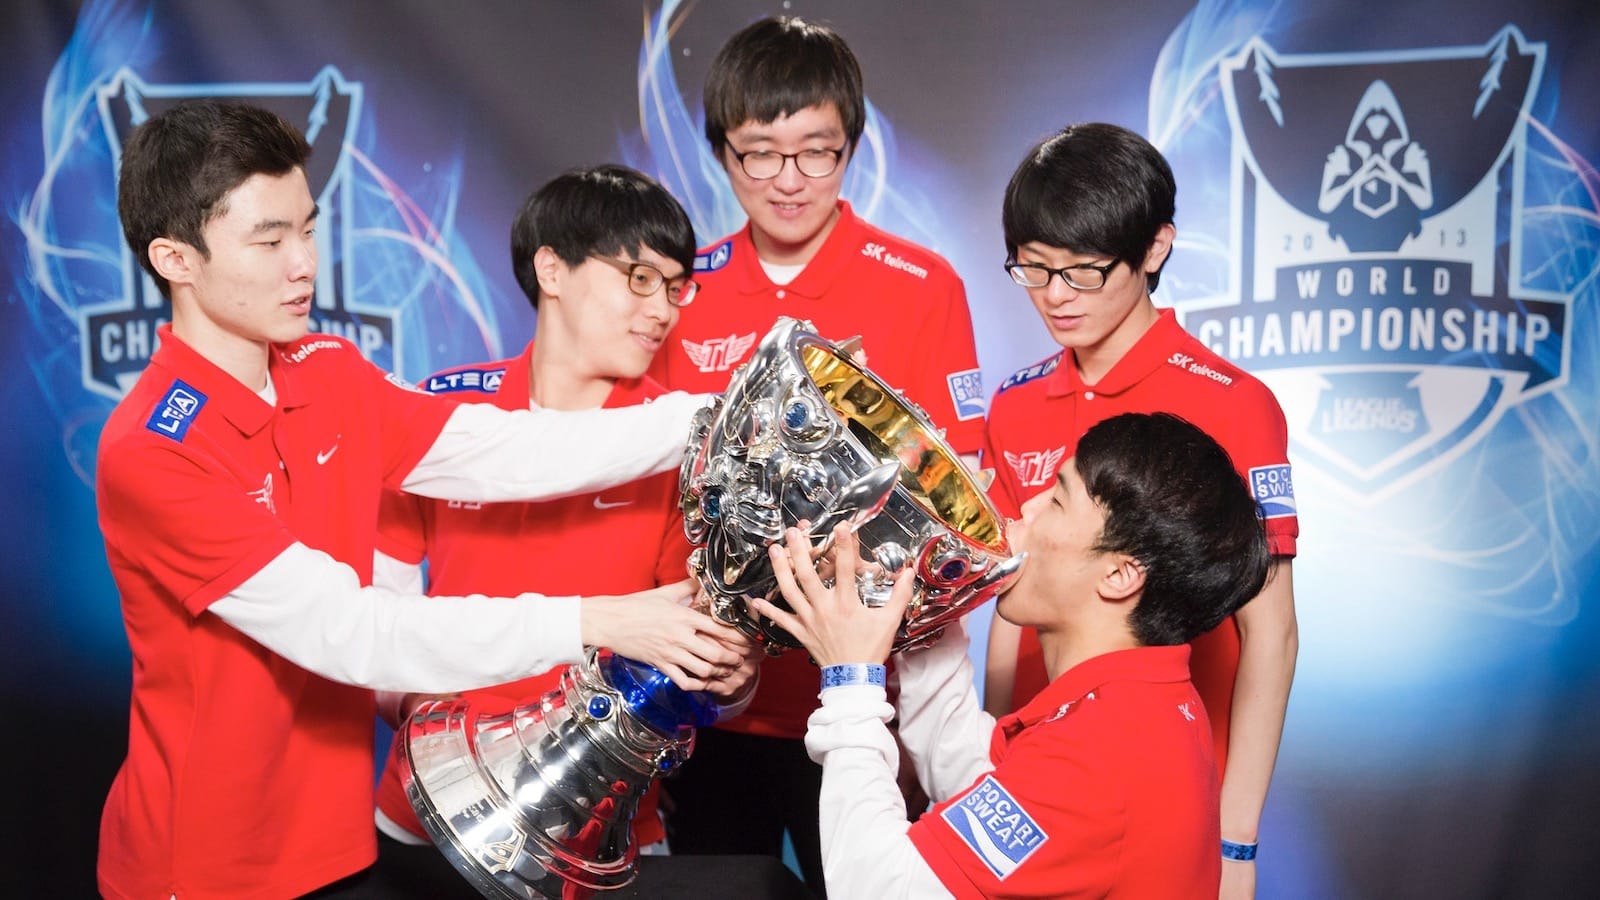 Worlds 2023: Faker wins his fourth World Championship as T1 stomps